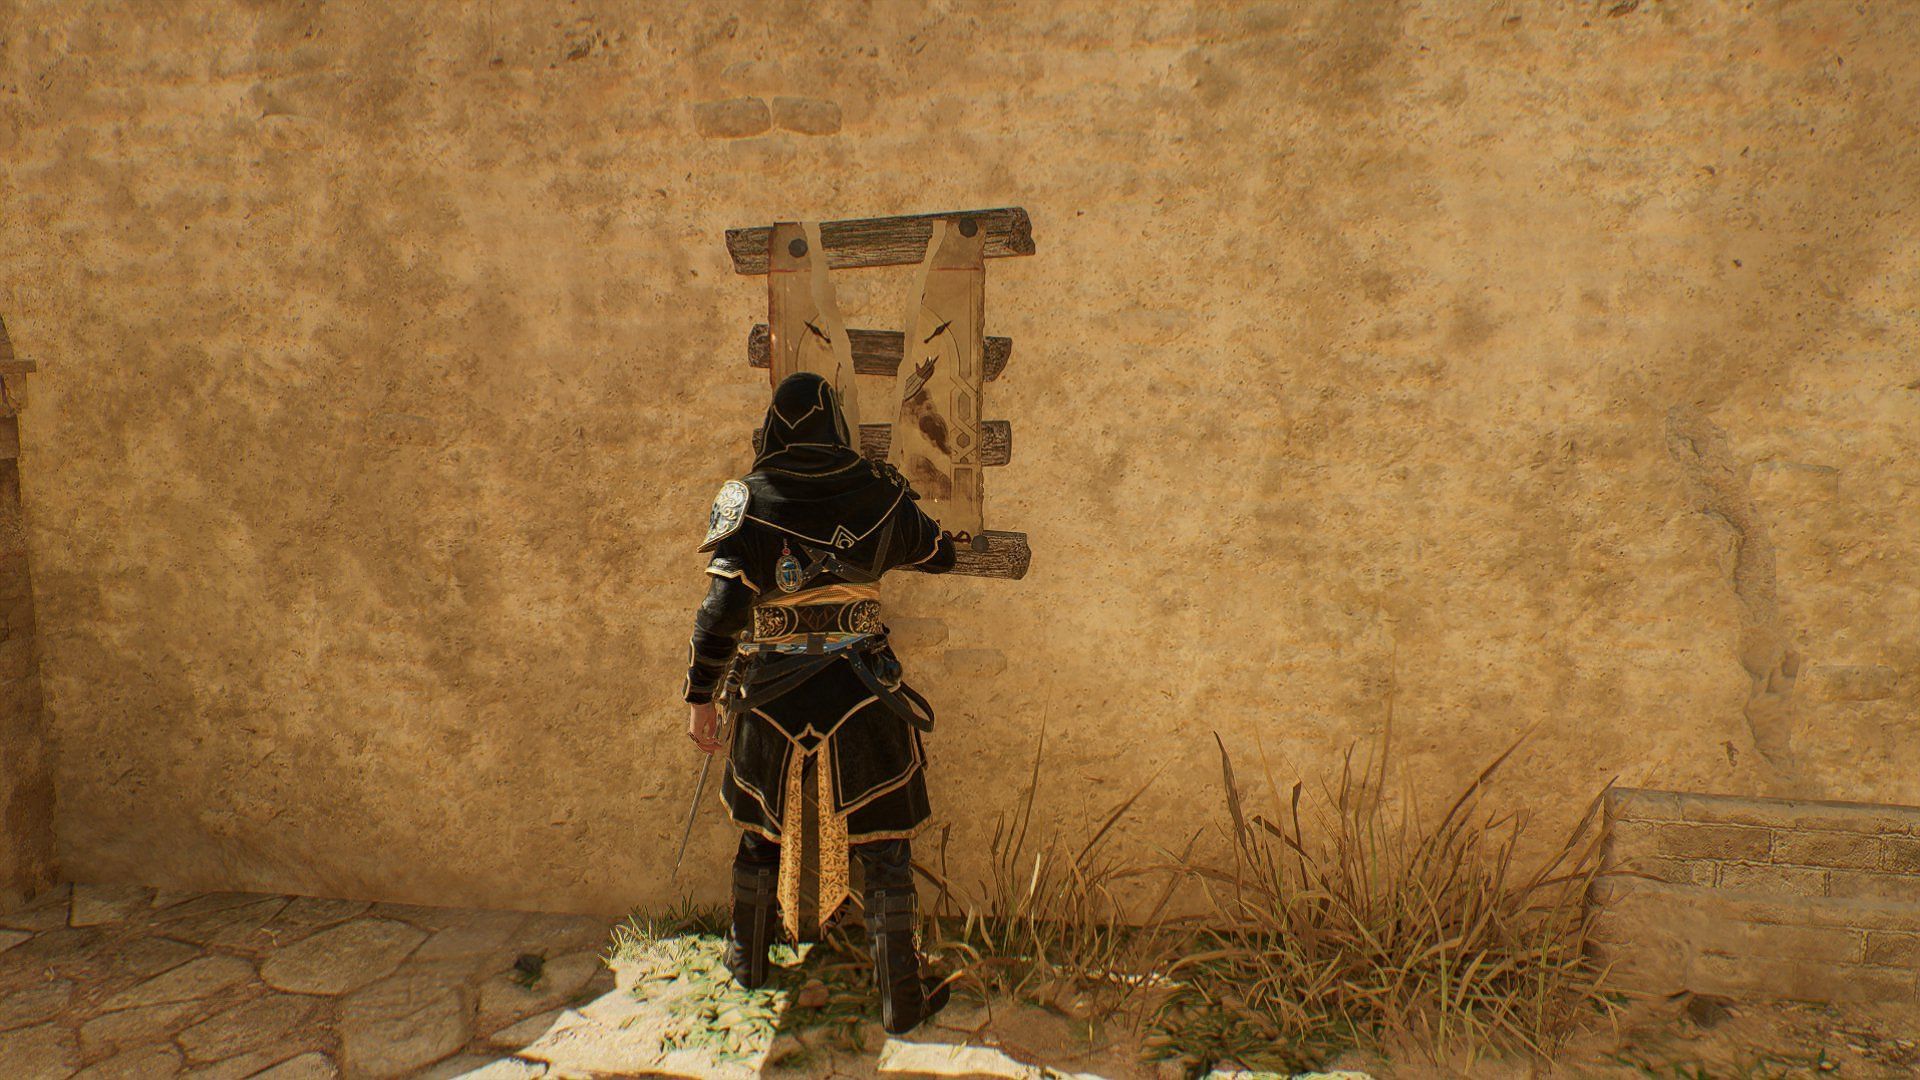 Tearing off poster to reduce notoriety makes the world more believable (Image screenshot from Assassin&#039;s Creed Mirage)